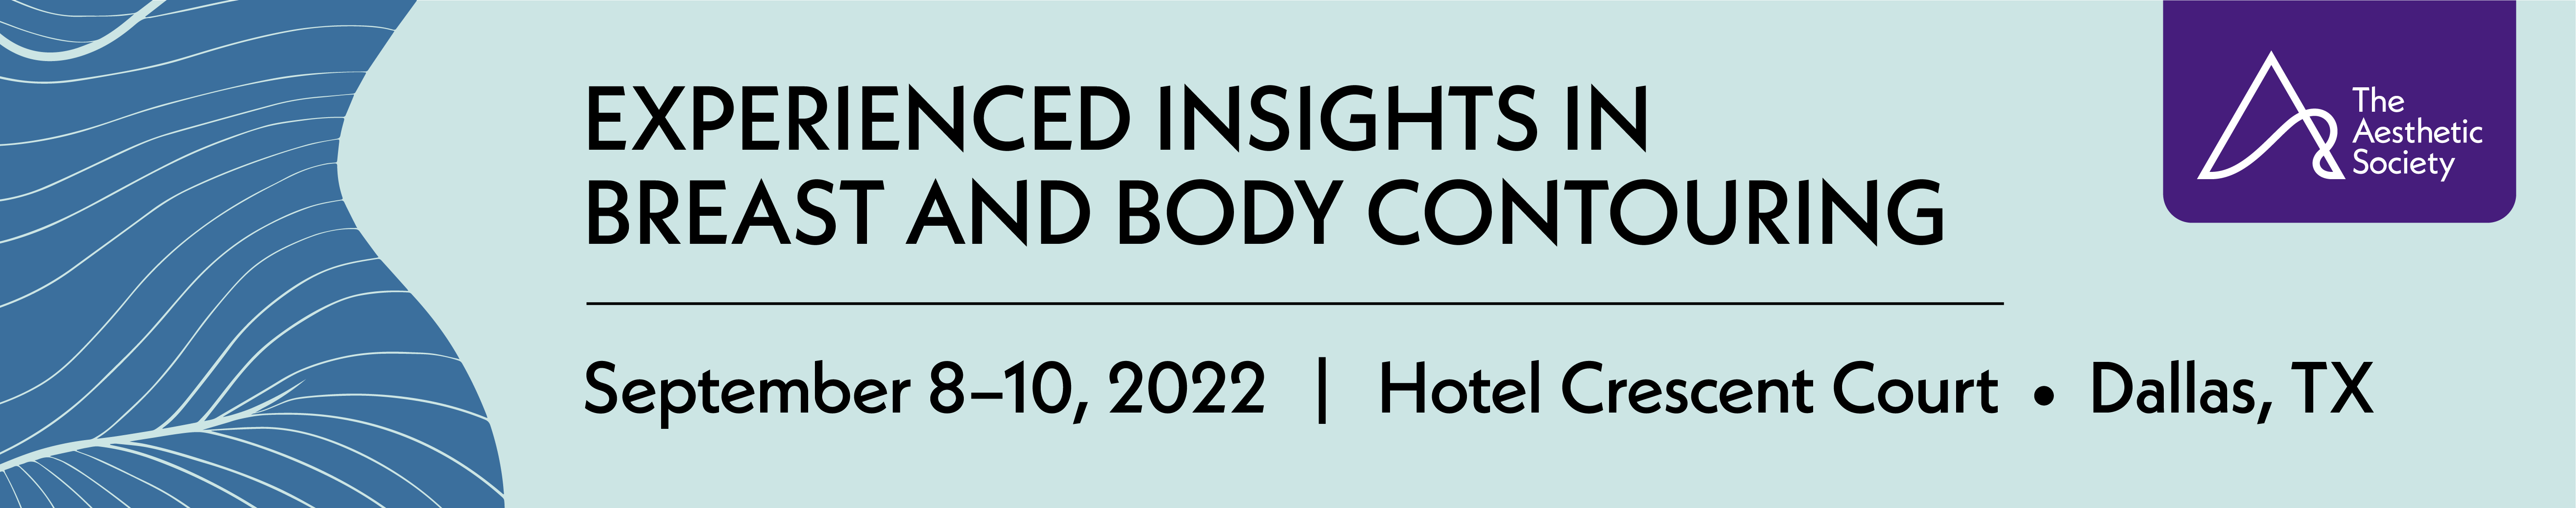 Experienced Insights in Breast and Body Contouring 2022